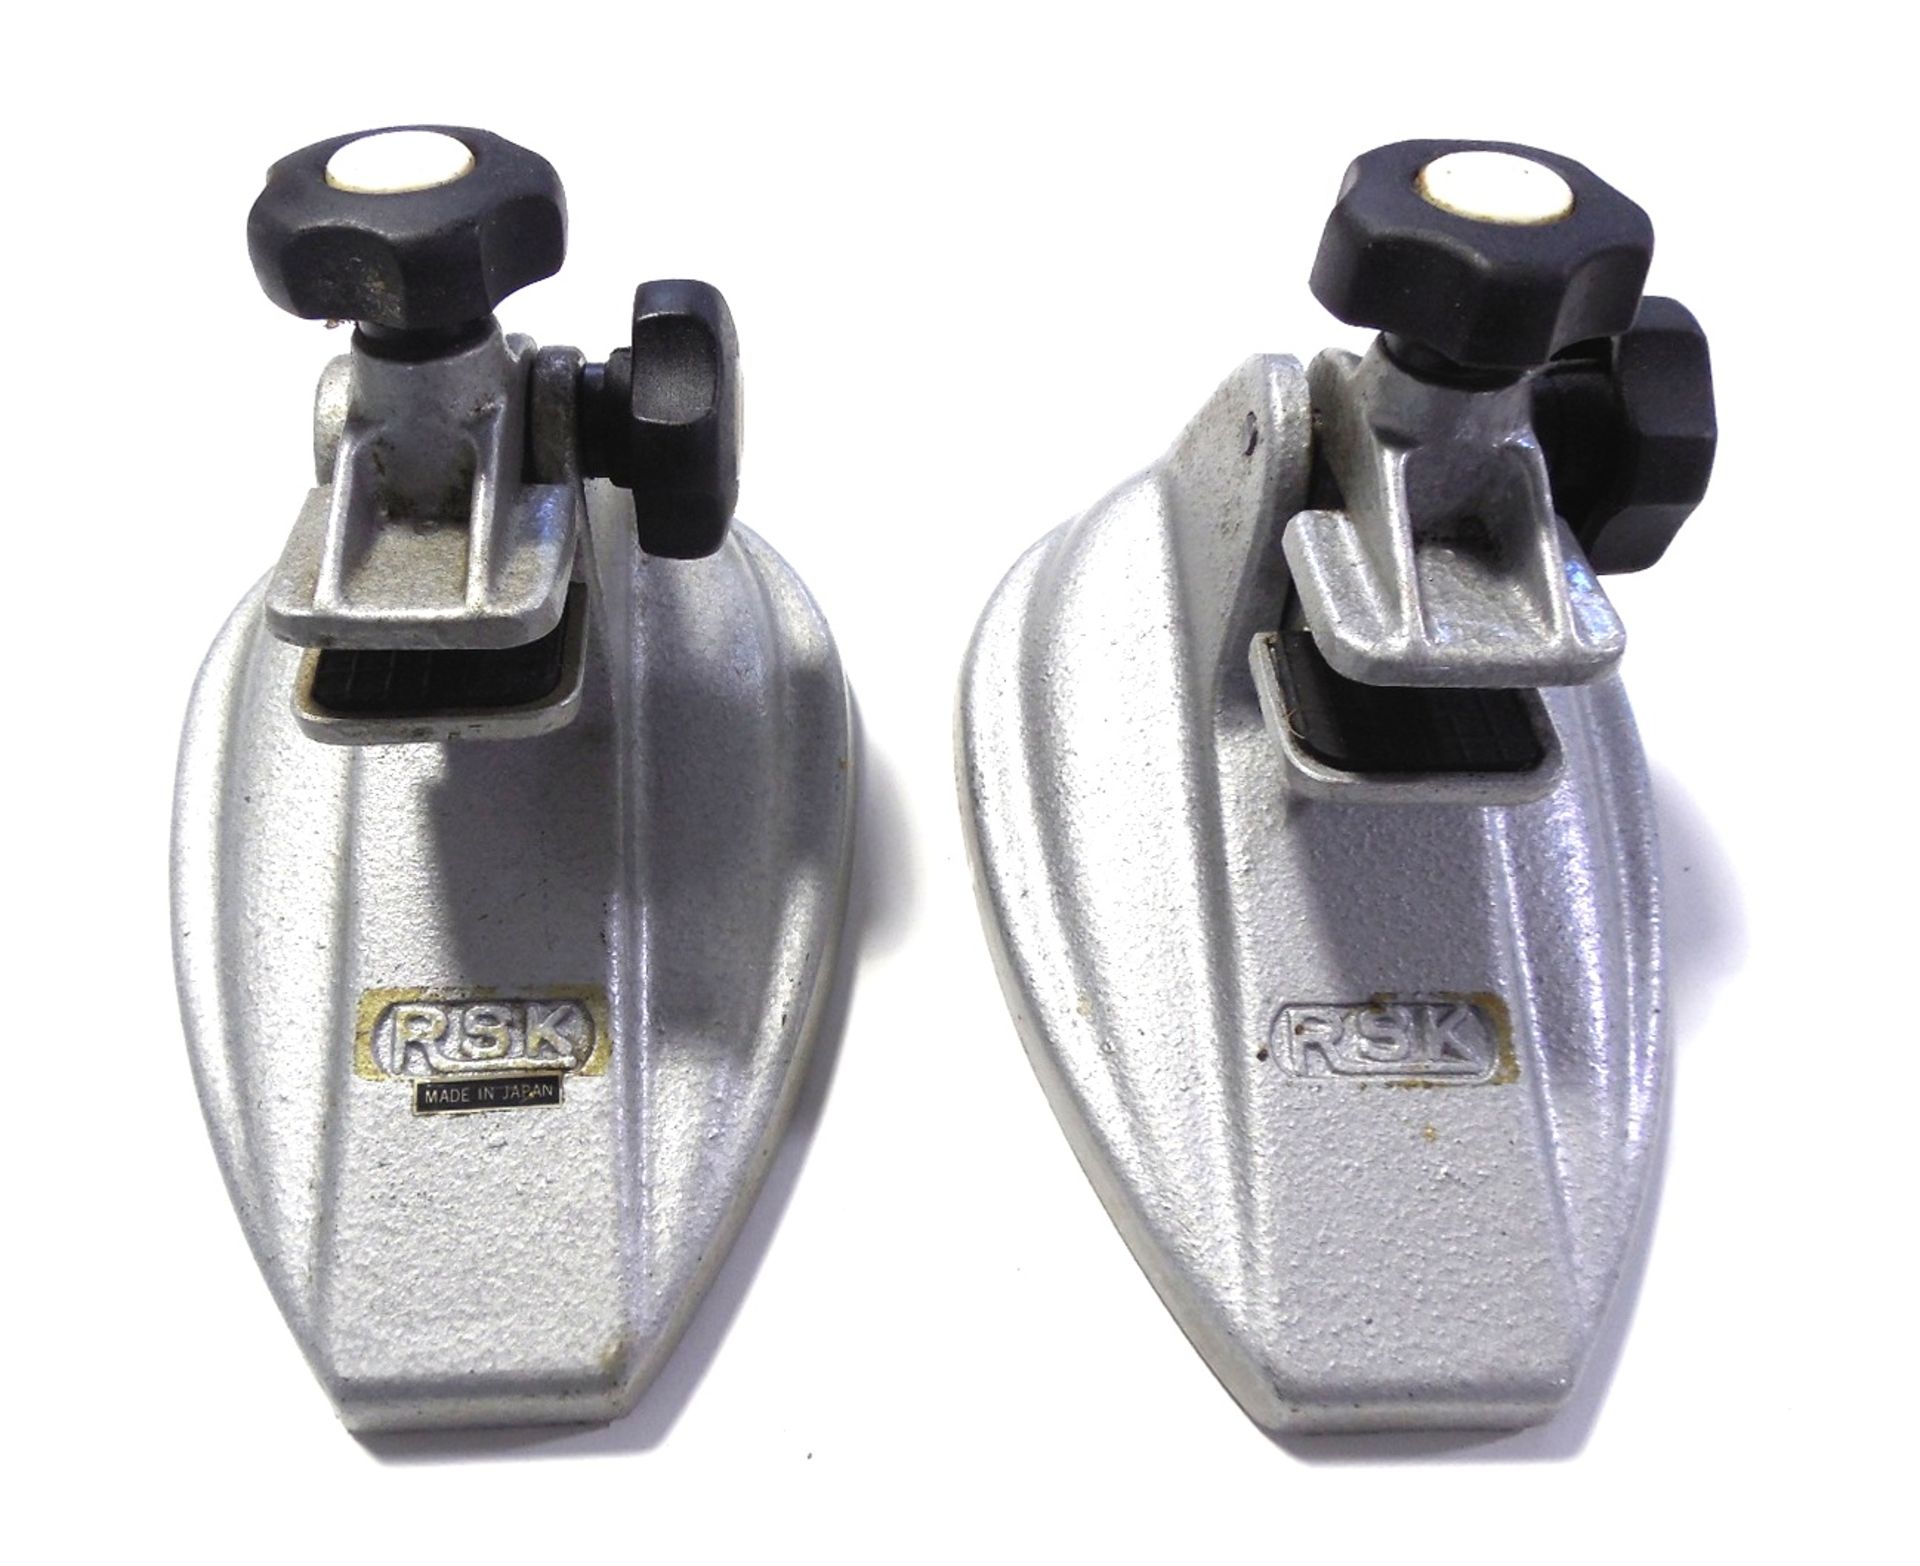 2-RSK MICROMETER STANDS